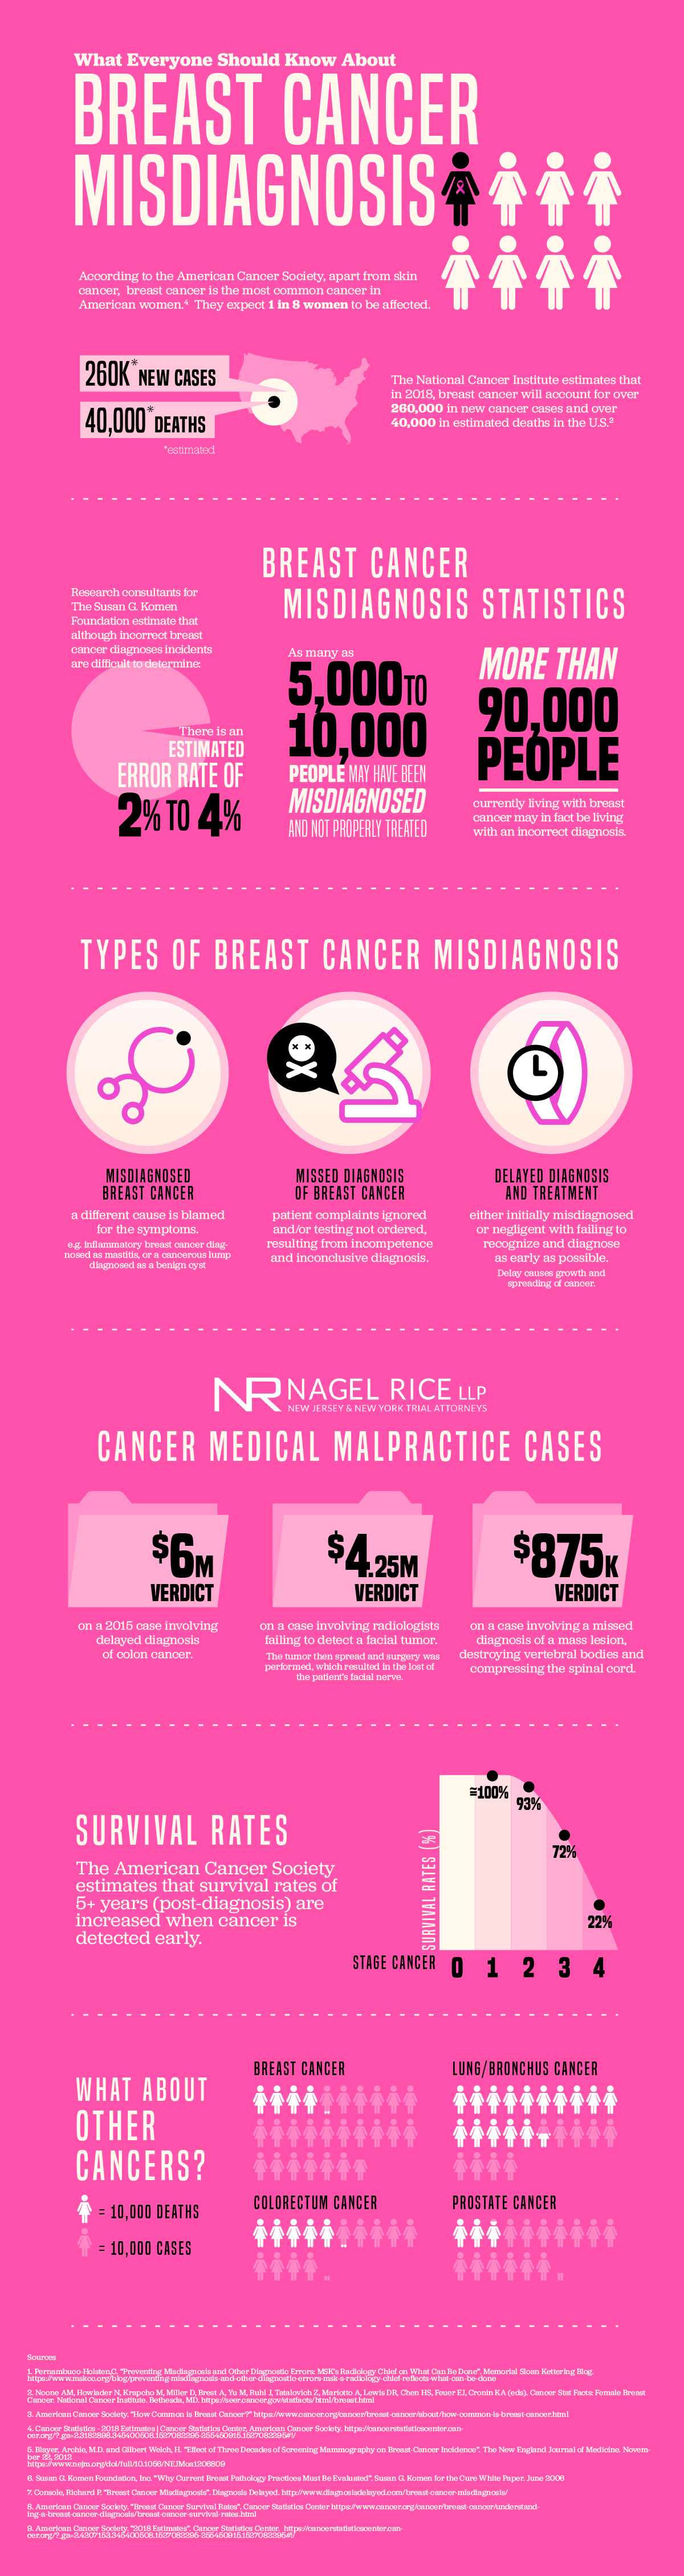 breast cancer misdiagnosis infographic